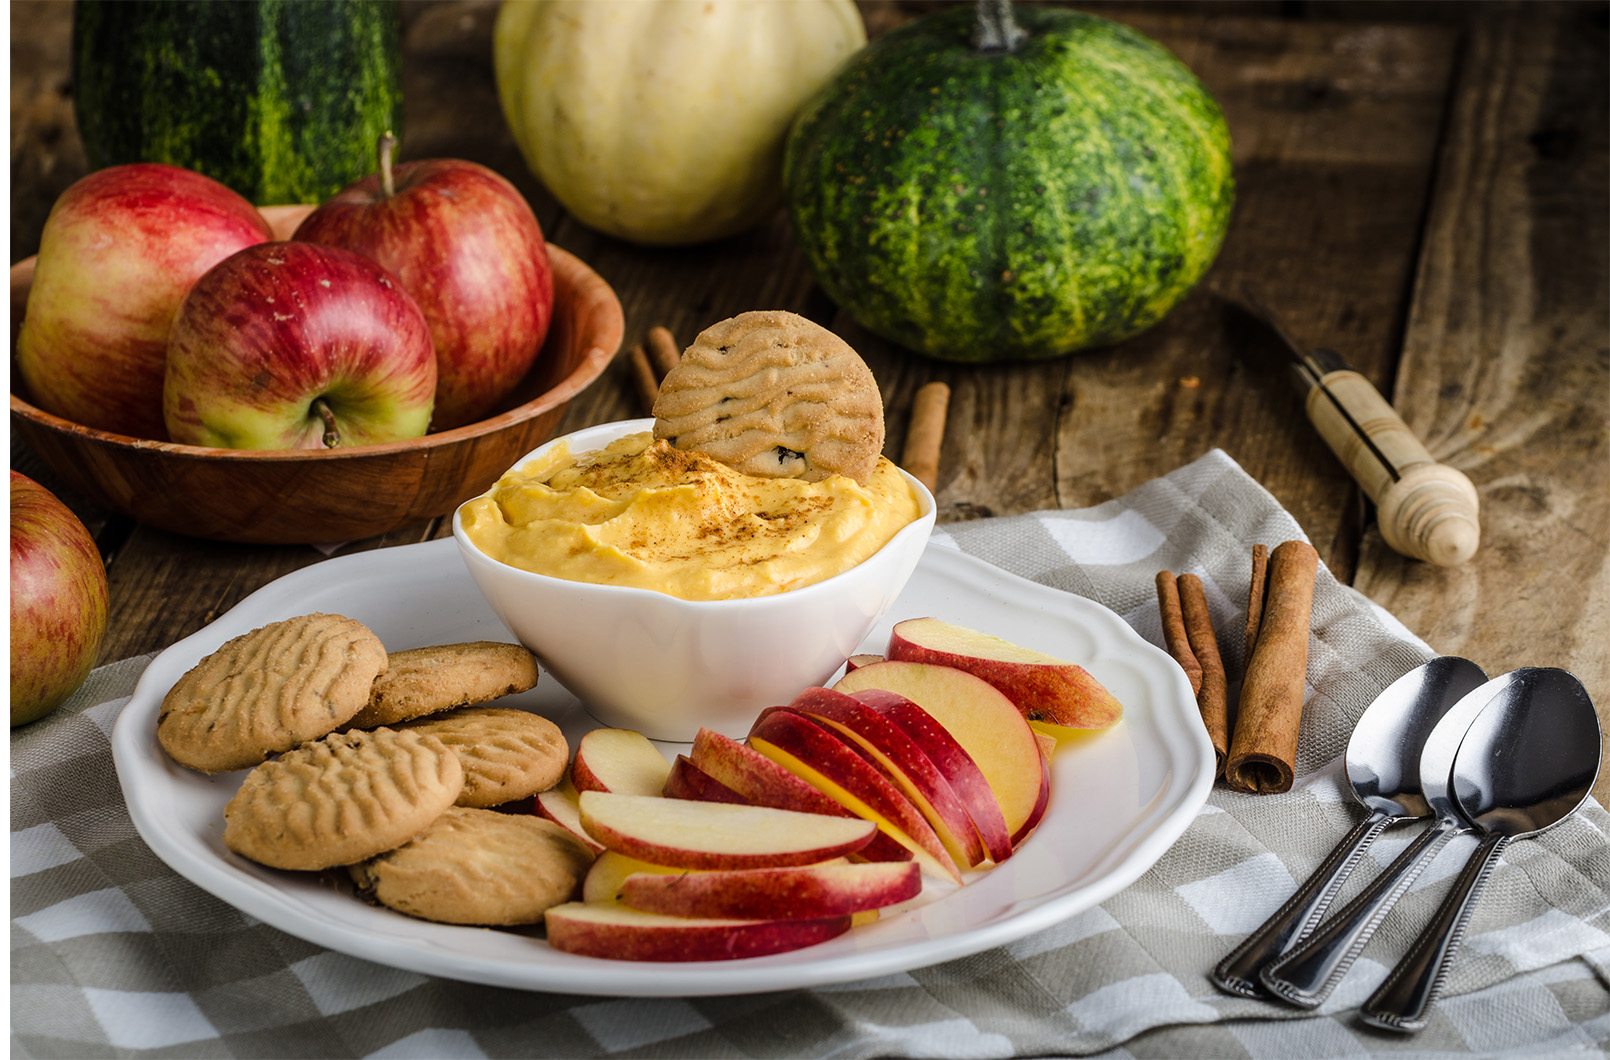 Maple Pumpkin yogurt dip with cinnamon, homemade biscuits and a delicious apple slices